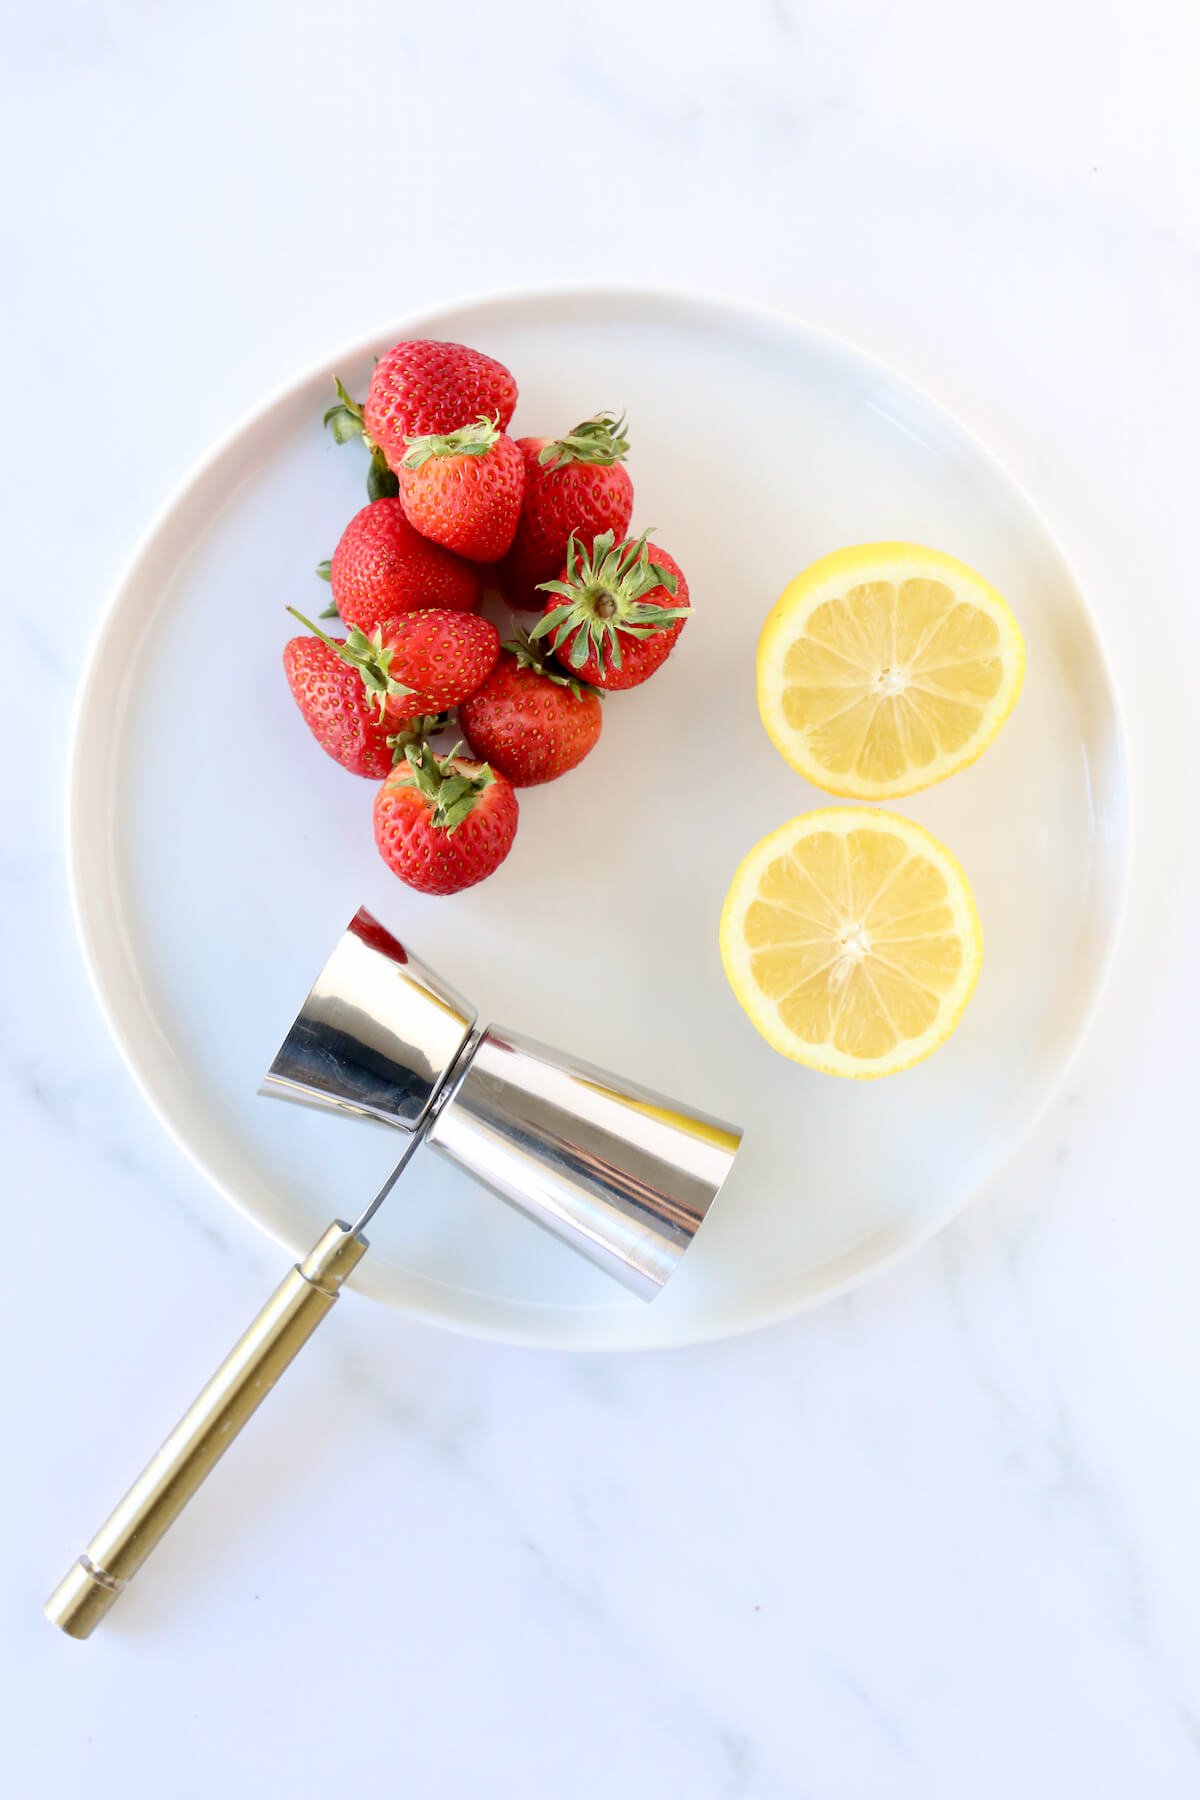 A white plate with whole strawberries, a lemon cut in half and a cocktail measuring spoon.